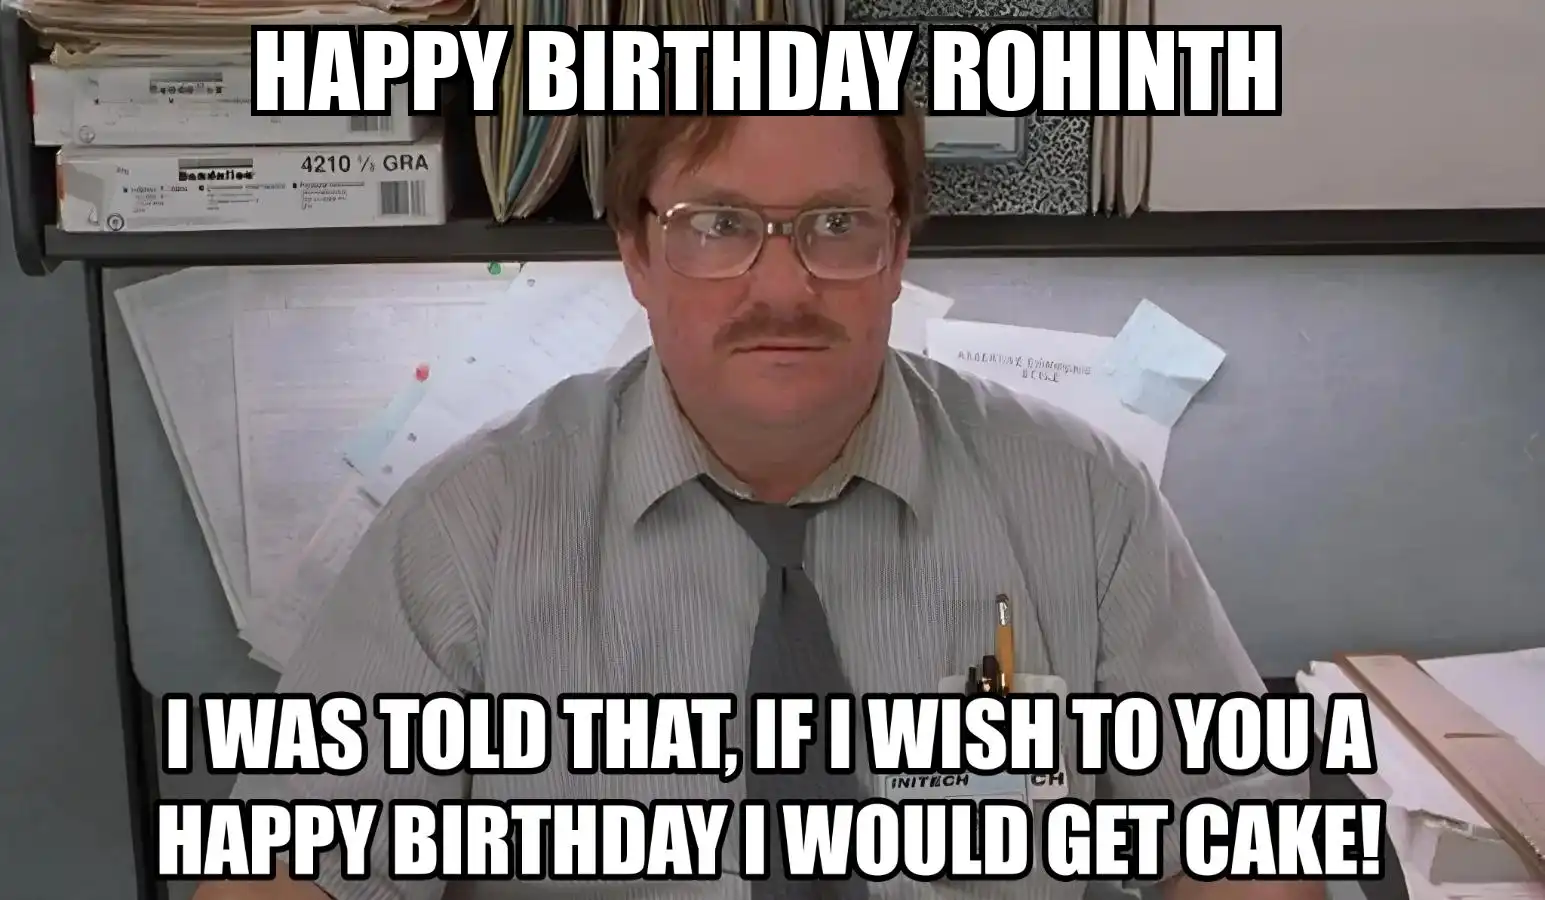 Happy Birthday Rohinth I Would Get A Cake Meme